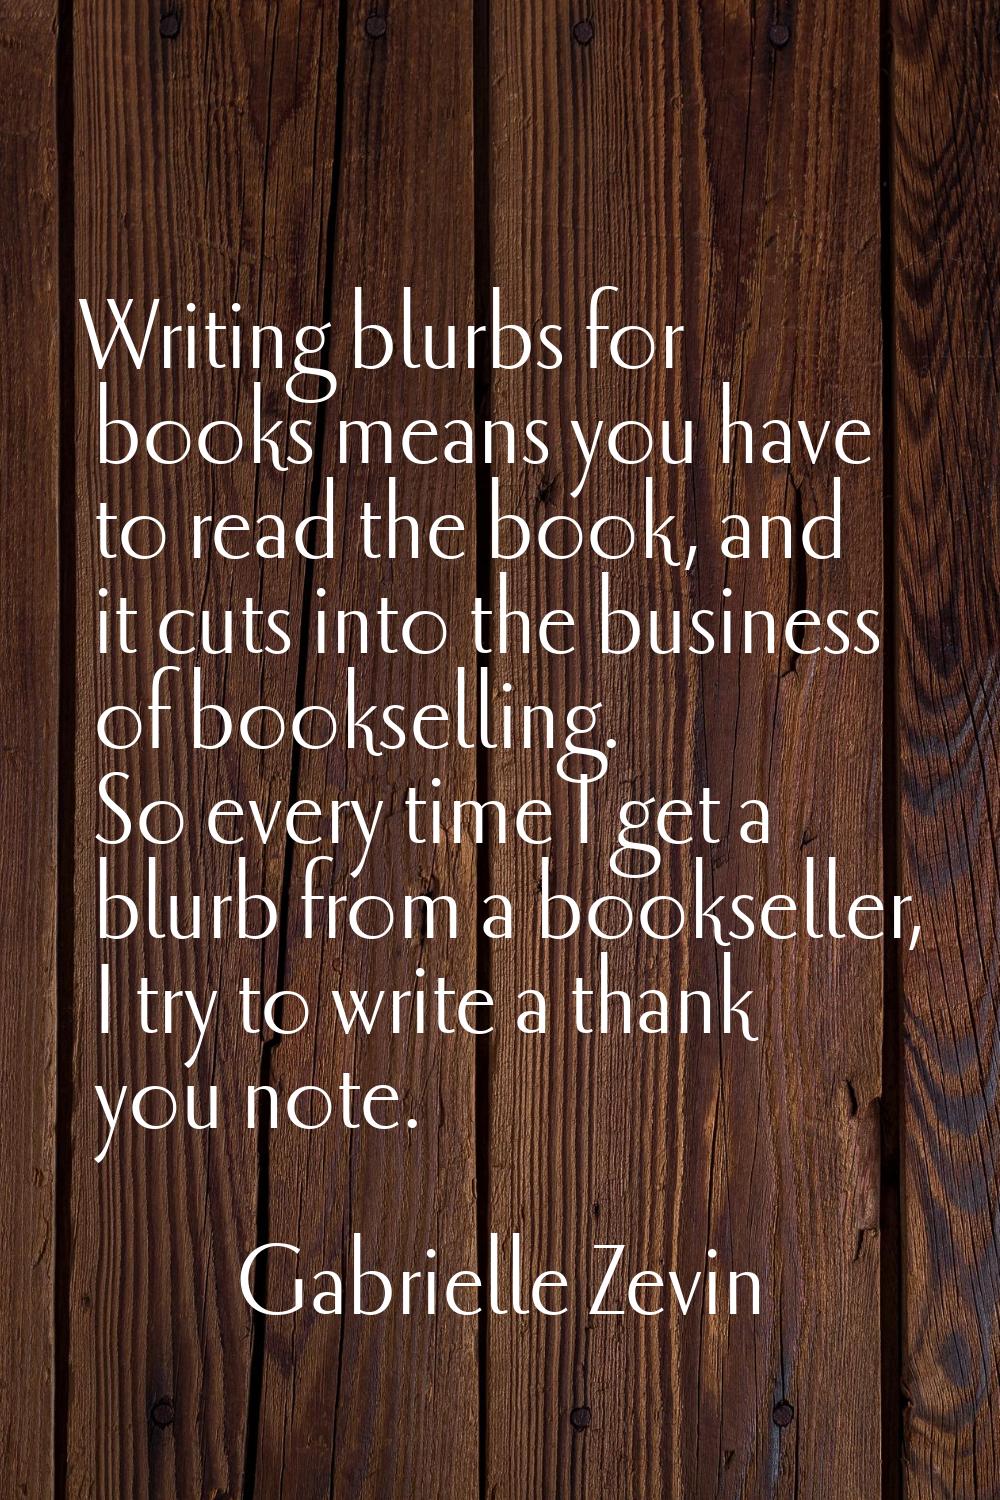 Writing blurbs for books means you have to read the book, and it cuts into the business of booksell